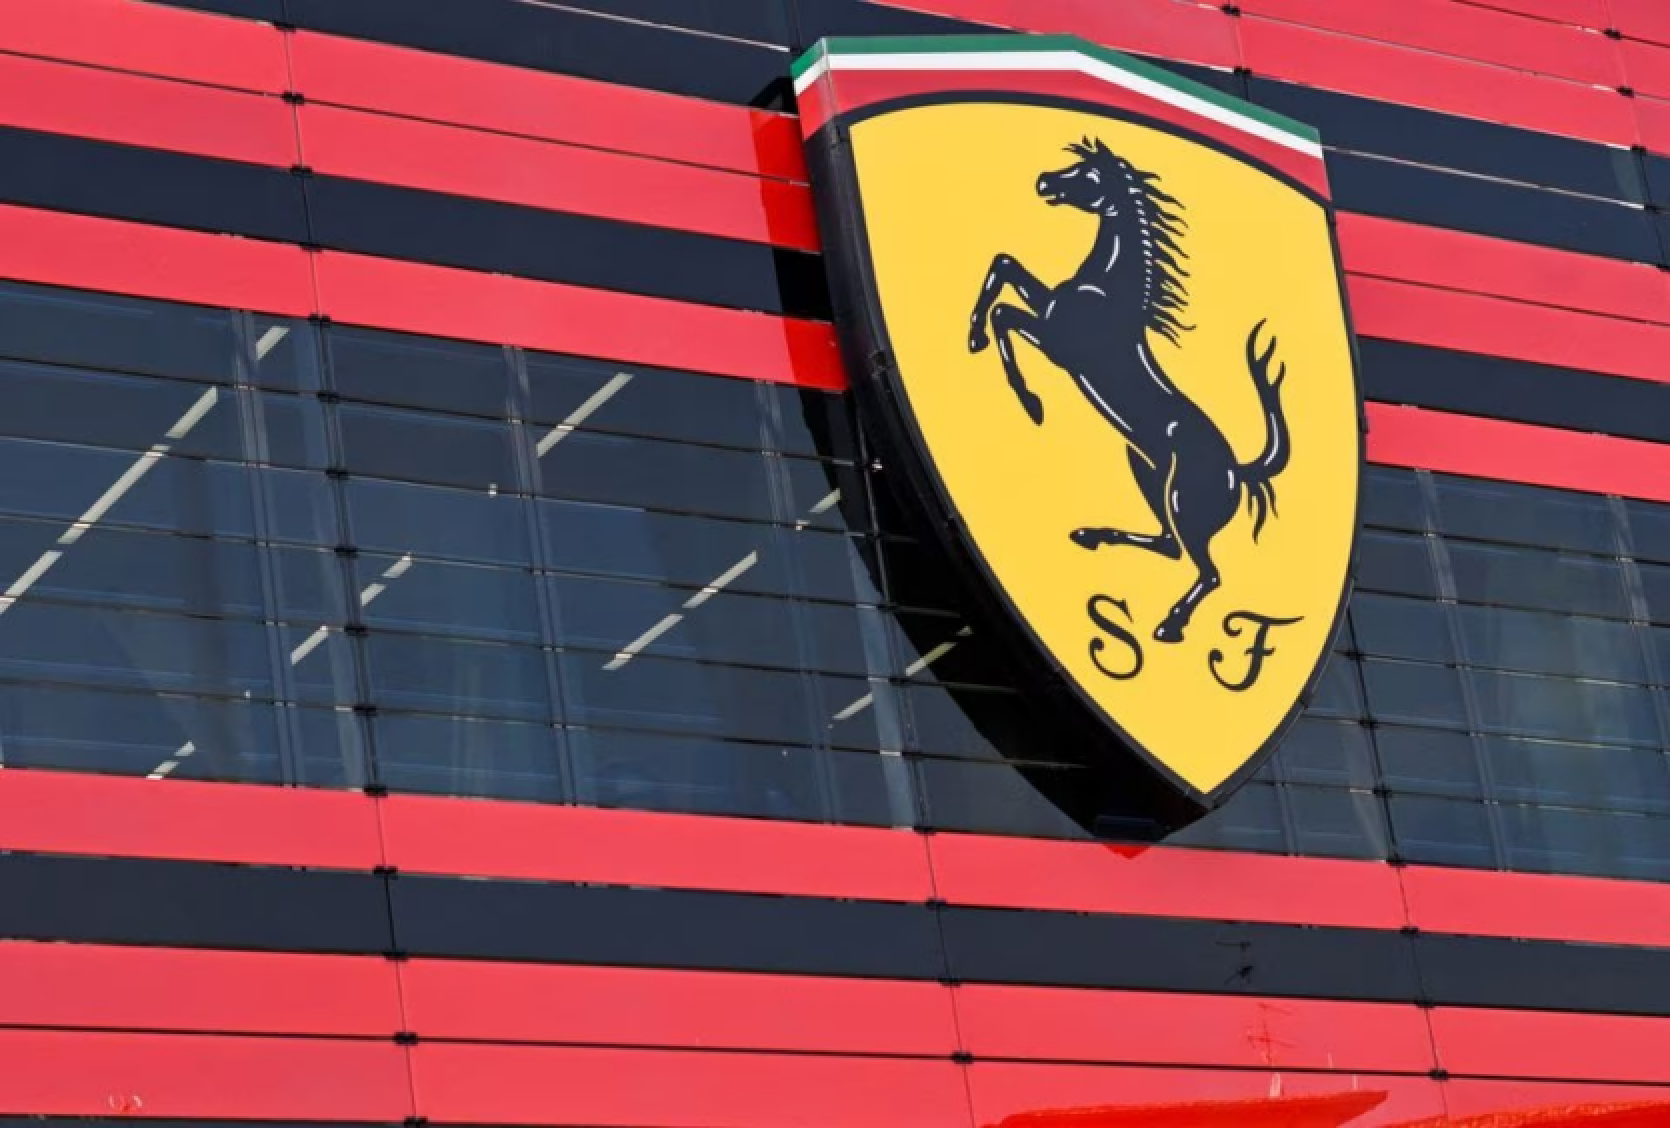 Ferrari has started selling supercars for cryptocurrency in the US